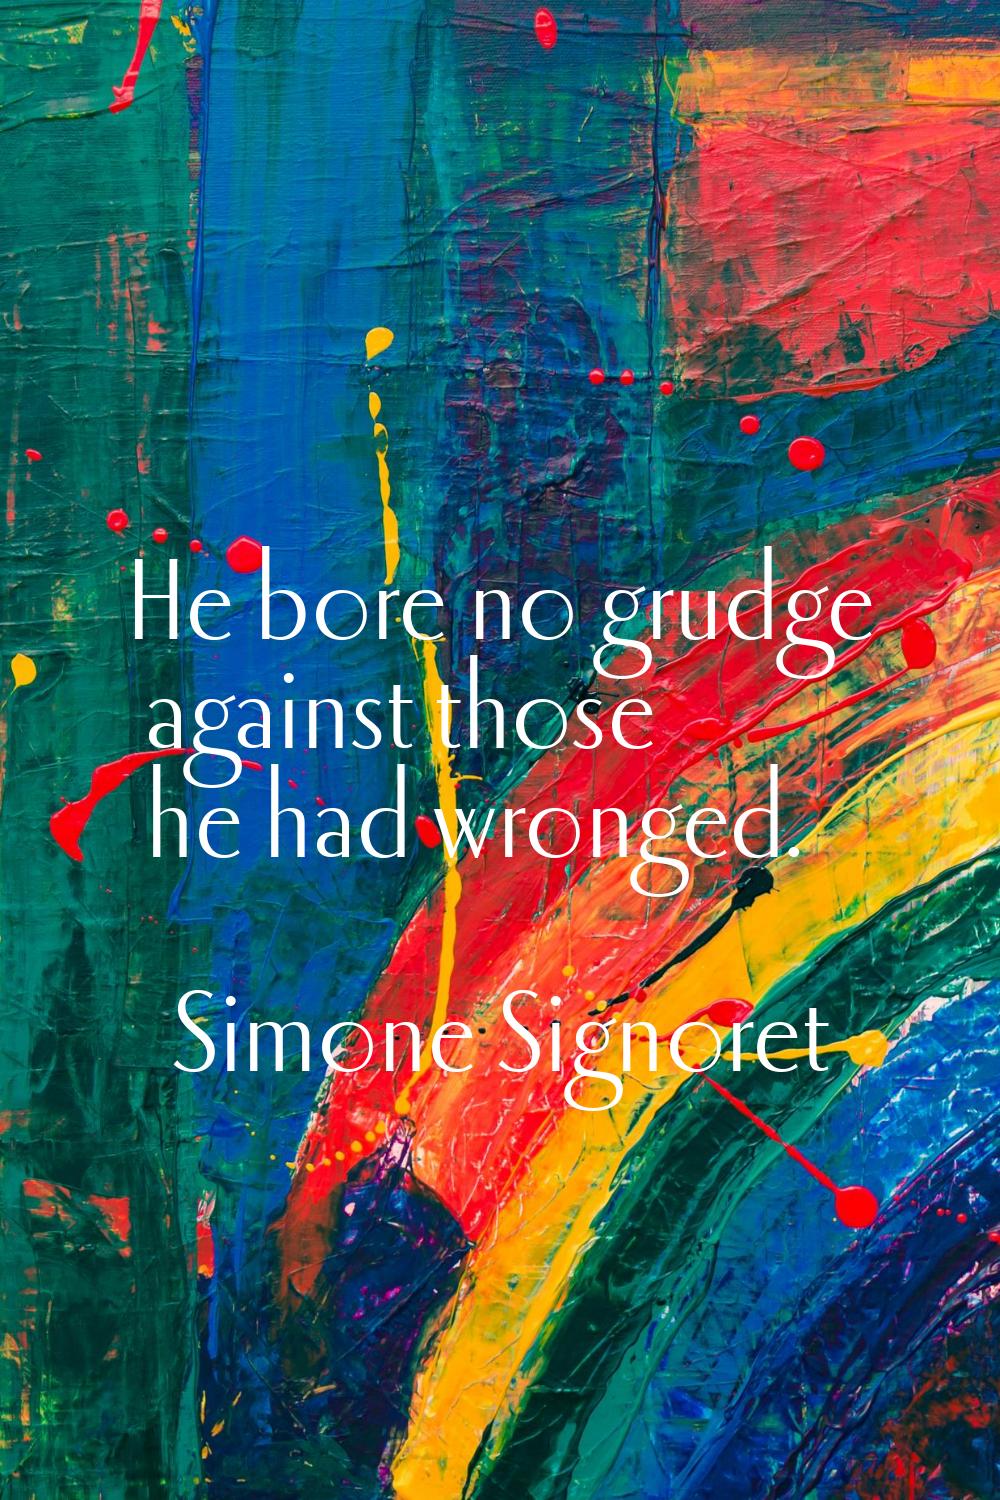 He bore no grudge against those he had wronged.